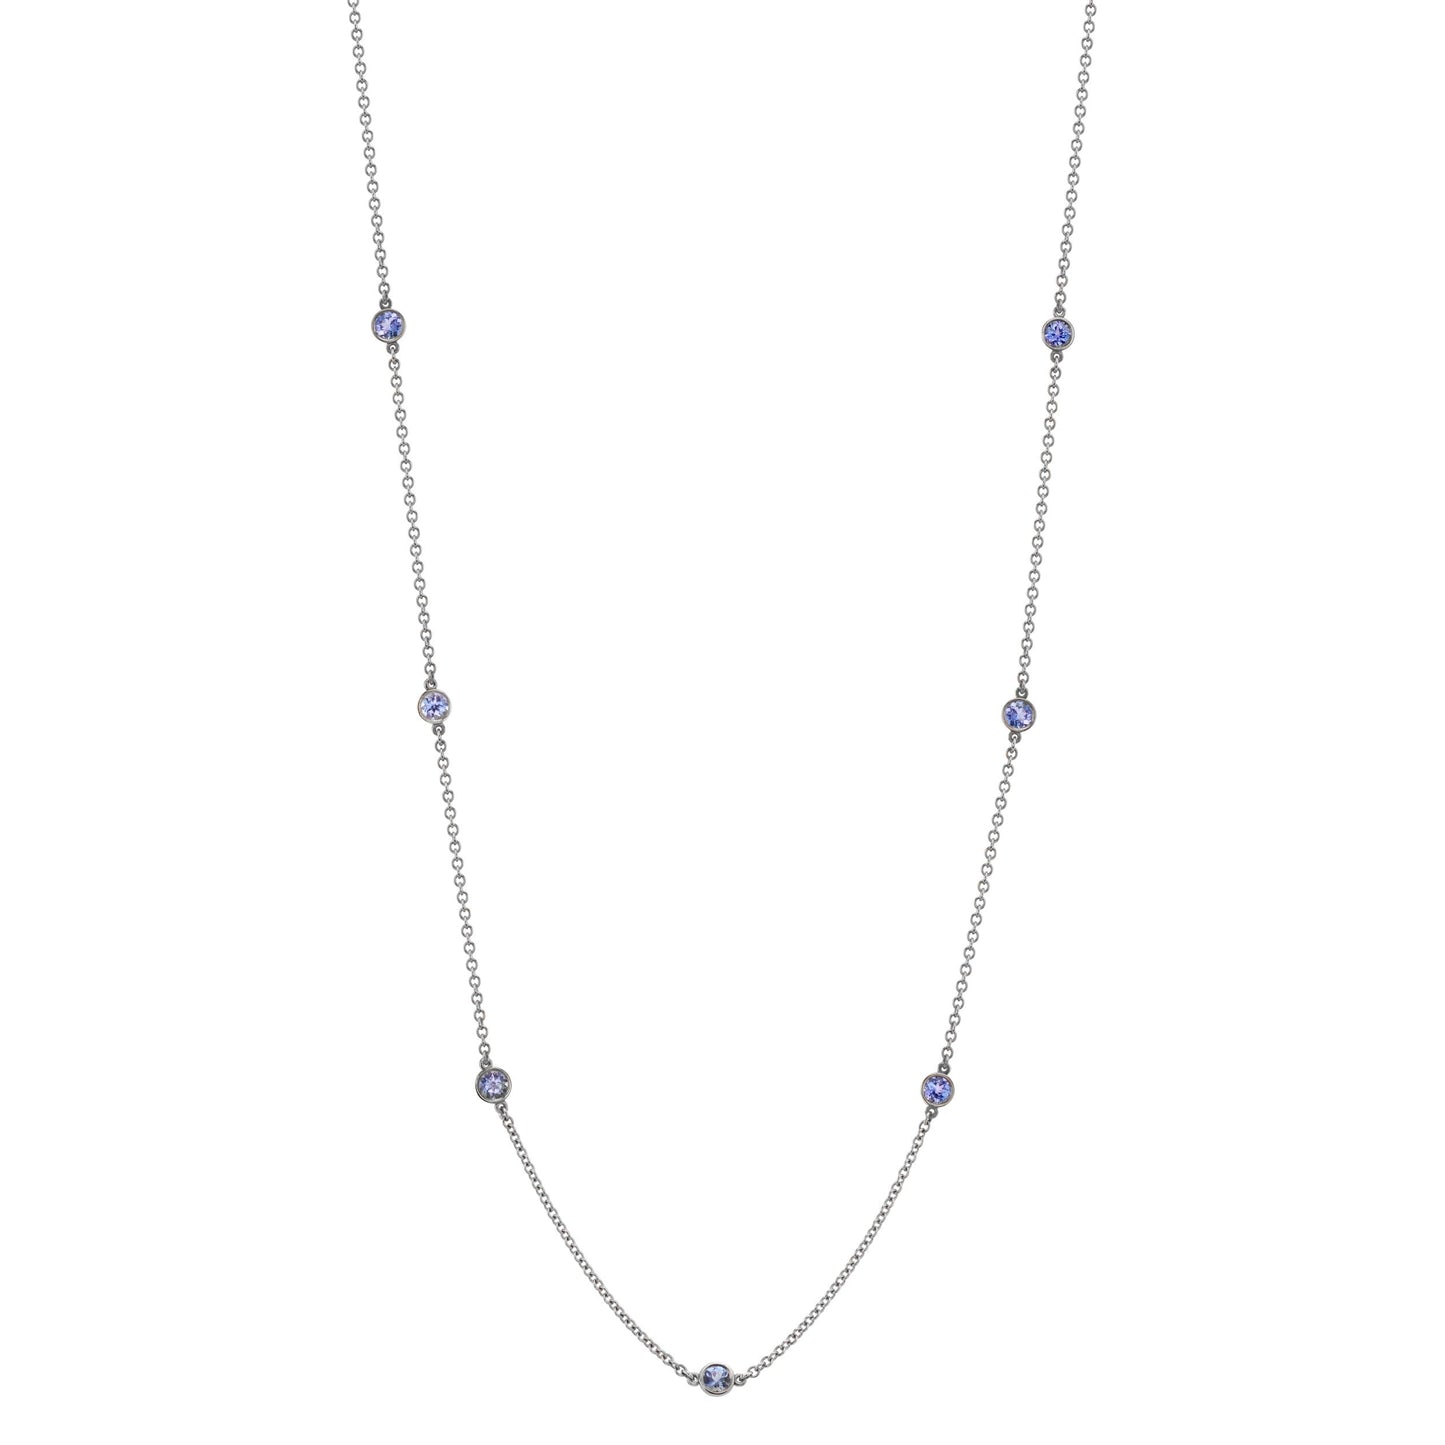 White Gold and Tanzanite Station Necklace